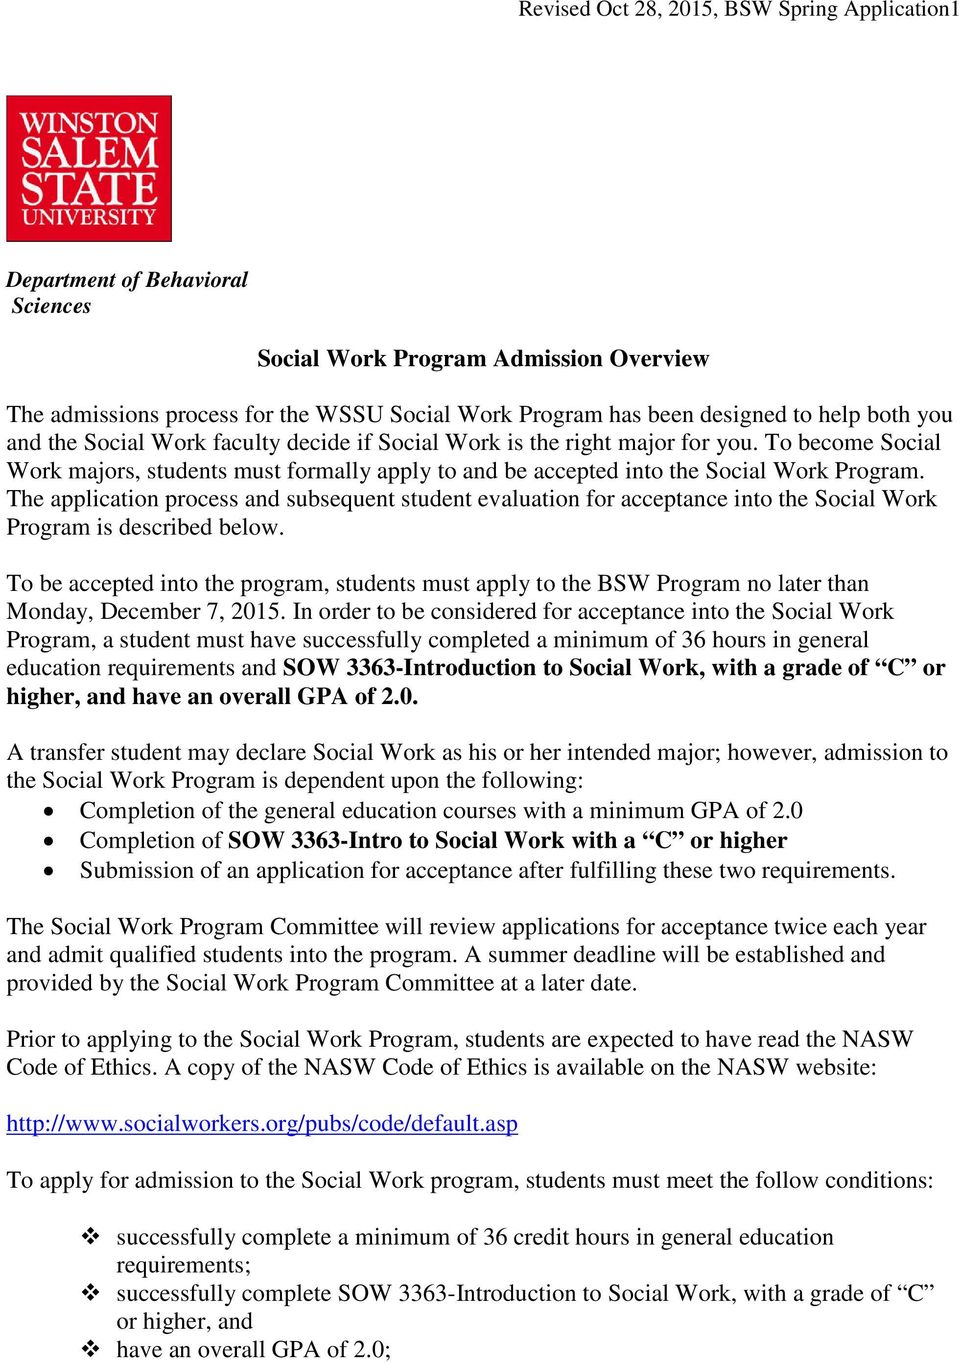 The application process and subsequent student evaluation for acceptance into the Social Work Program is described below.